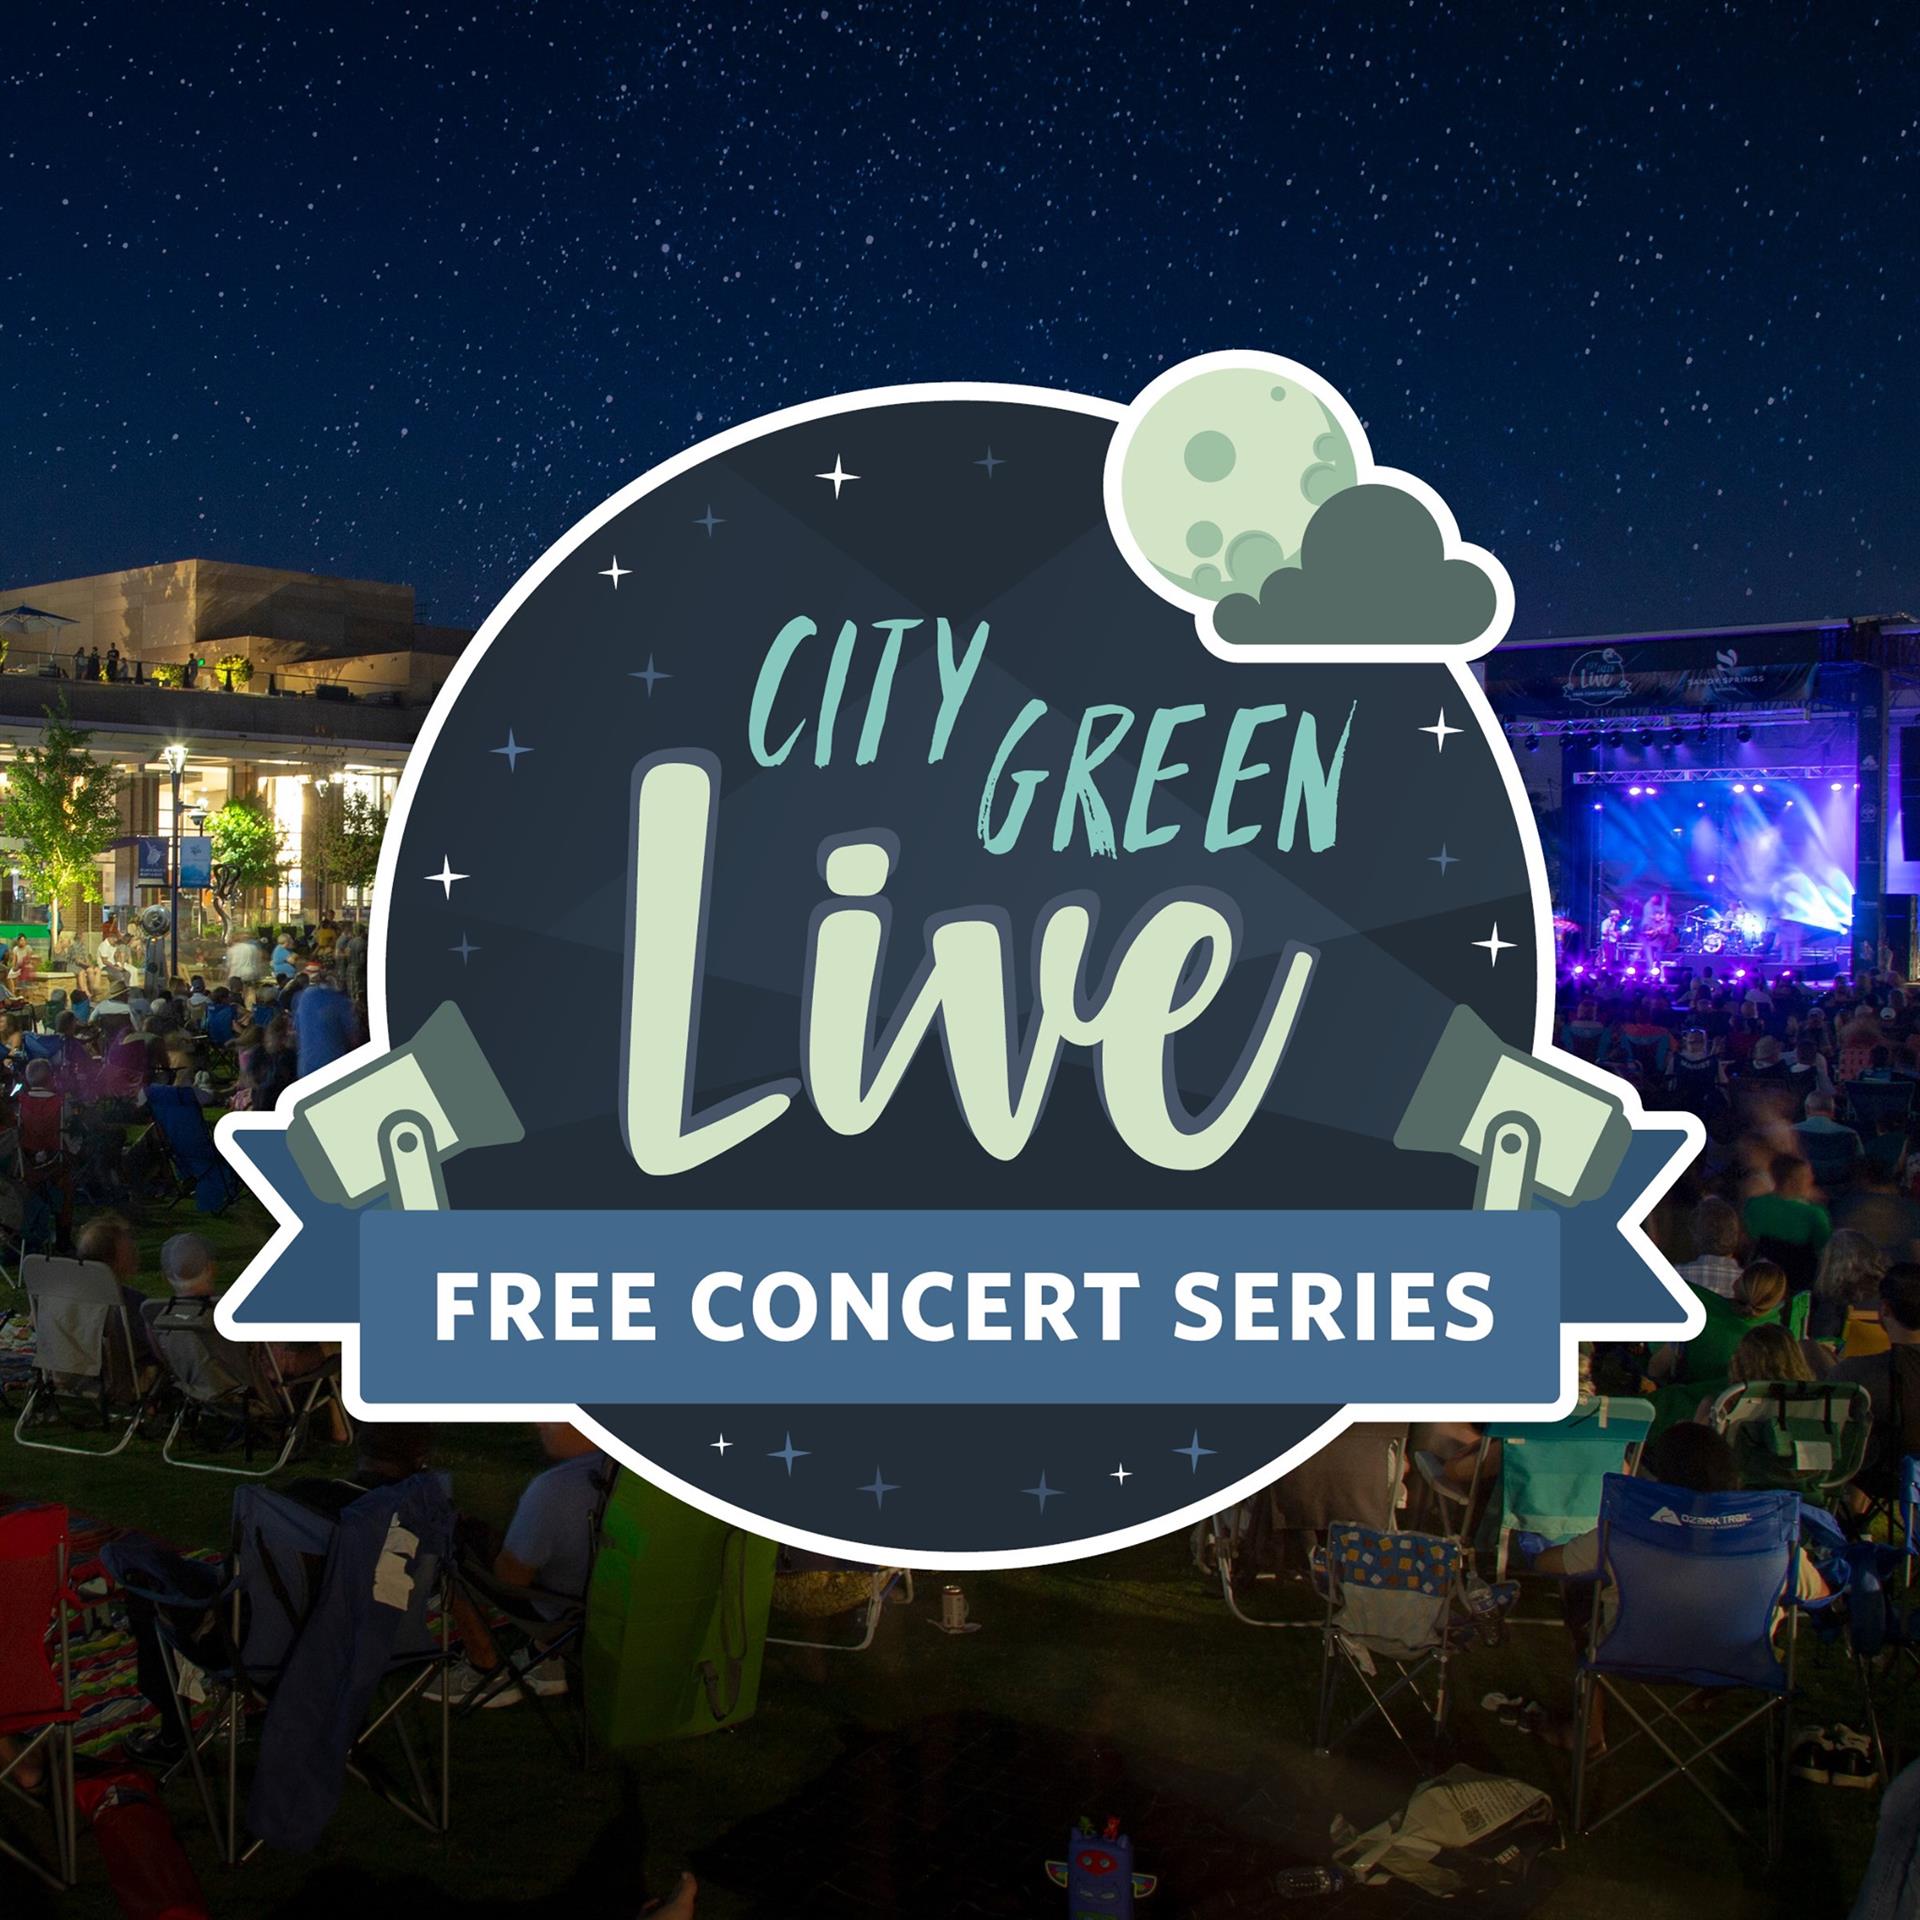 City Green Live Terrace Party Passes